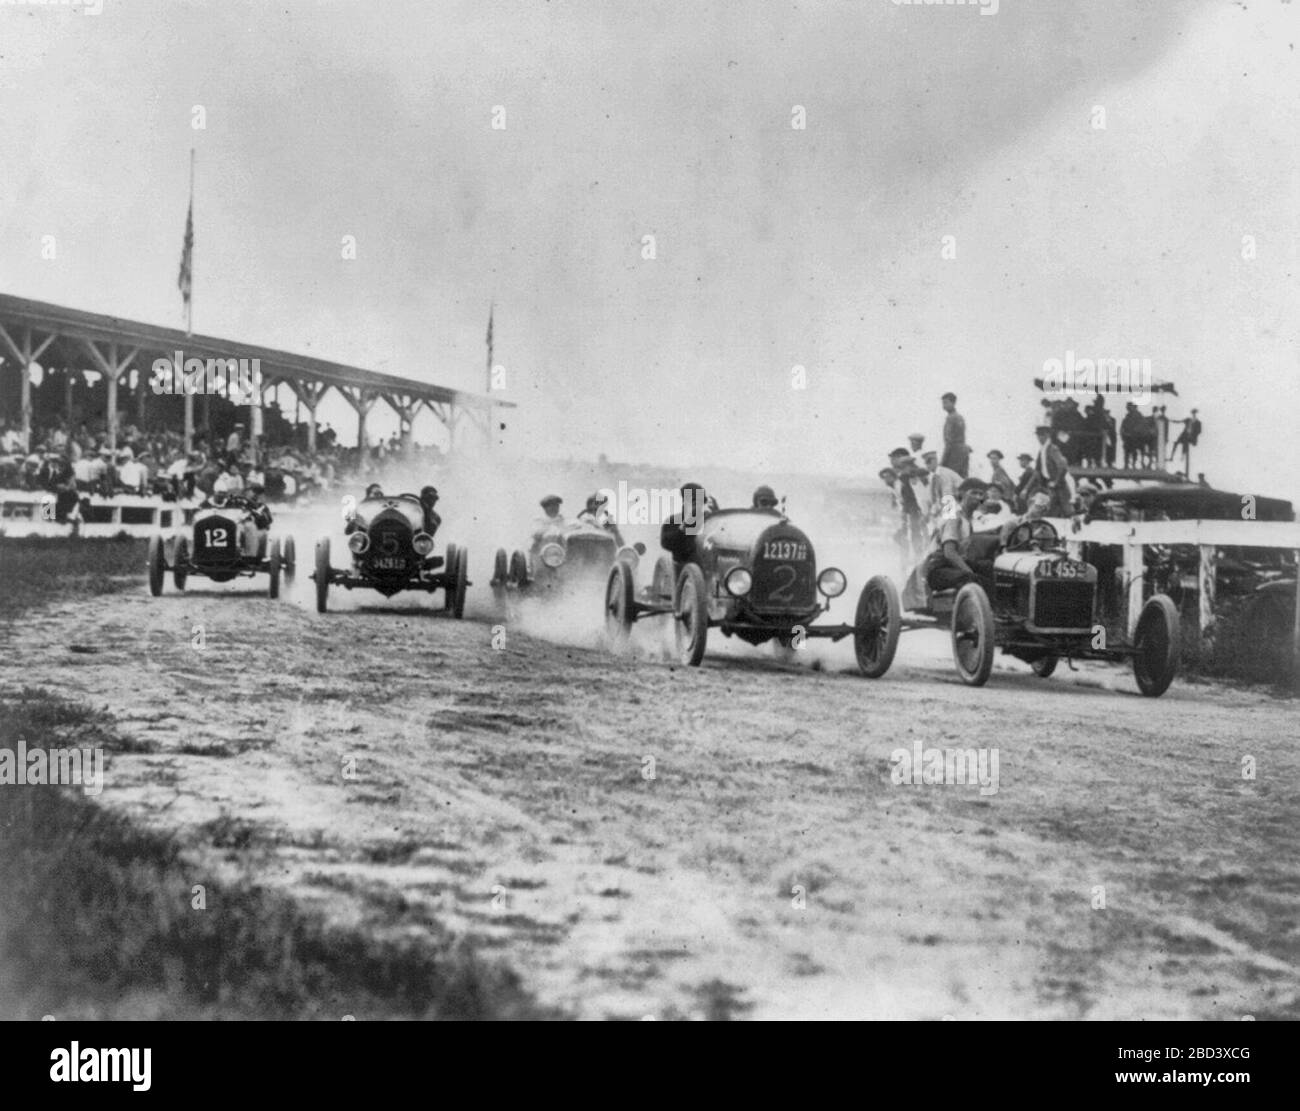 Auto racing in or near Washington, D.C. - View of two-man autos rounding curve, circa 1922 Stock Photo